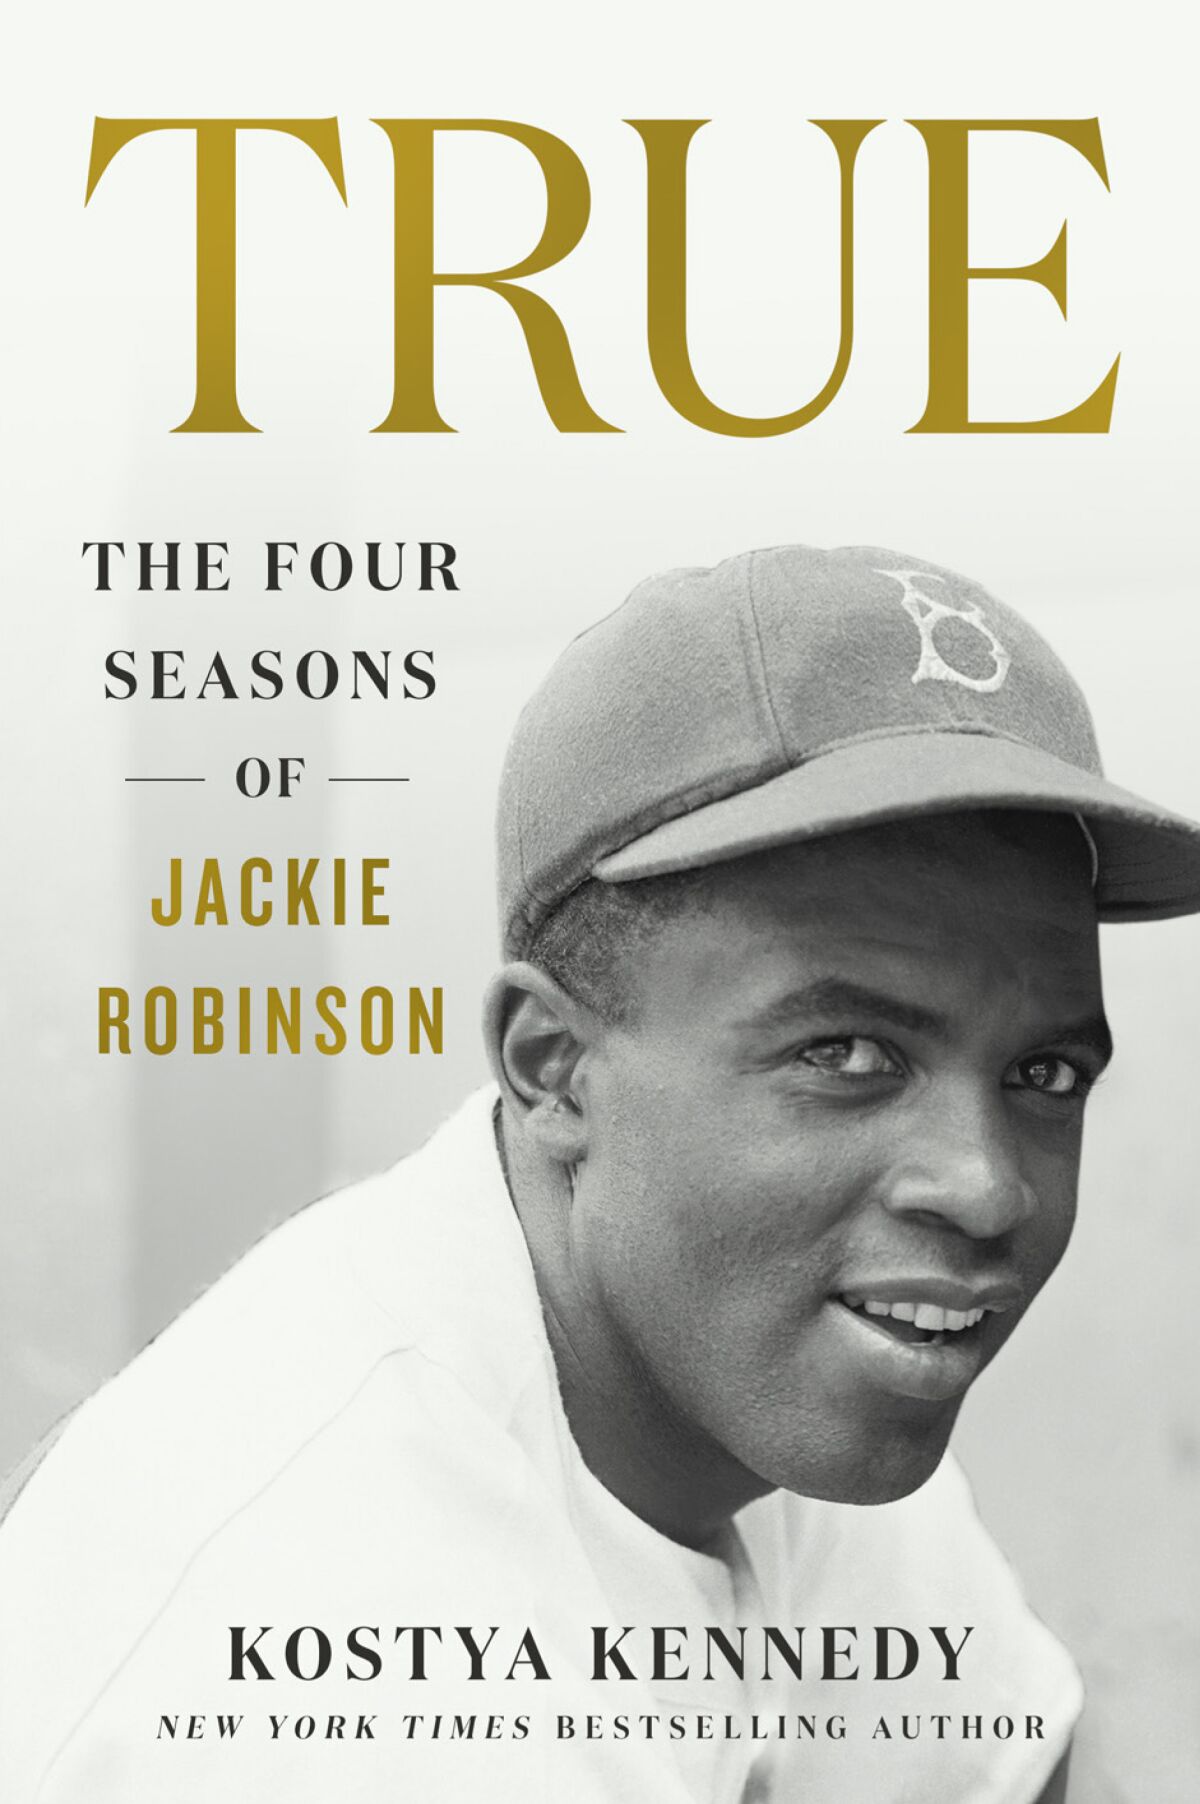 Book cover of "TRUE: The Four Seasons of Jackie Robinson"